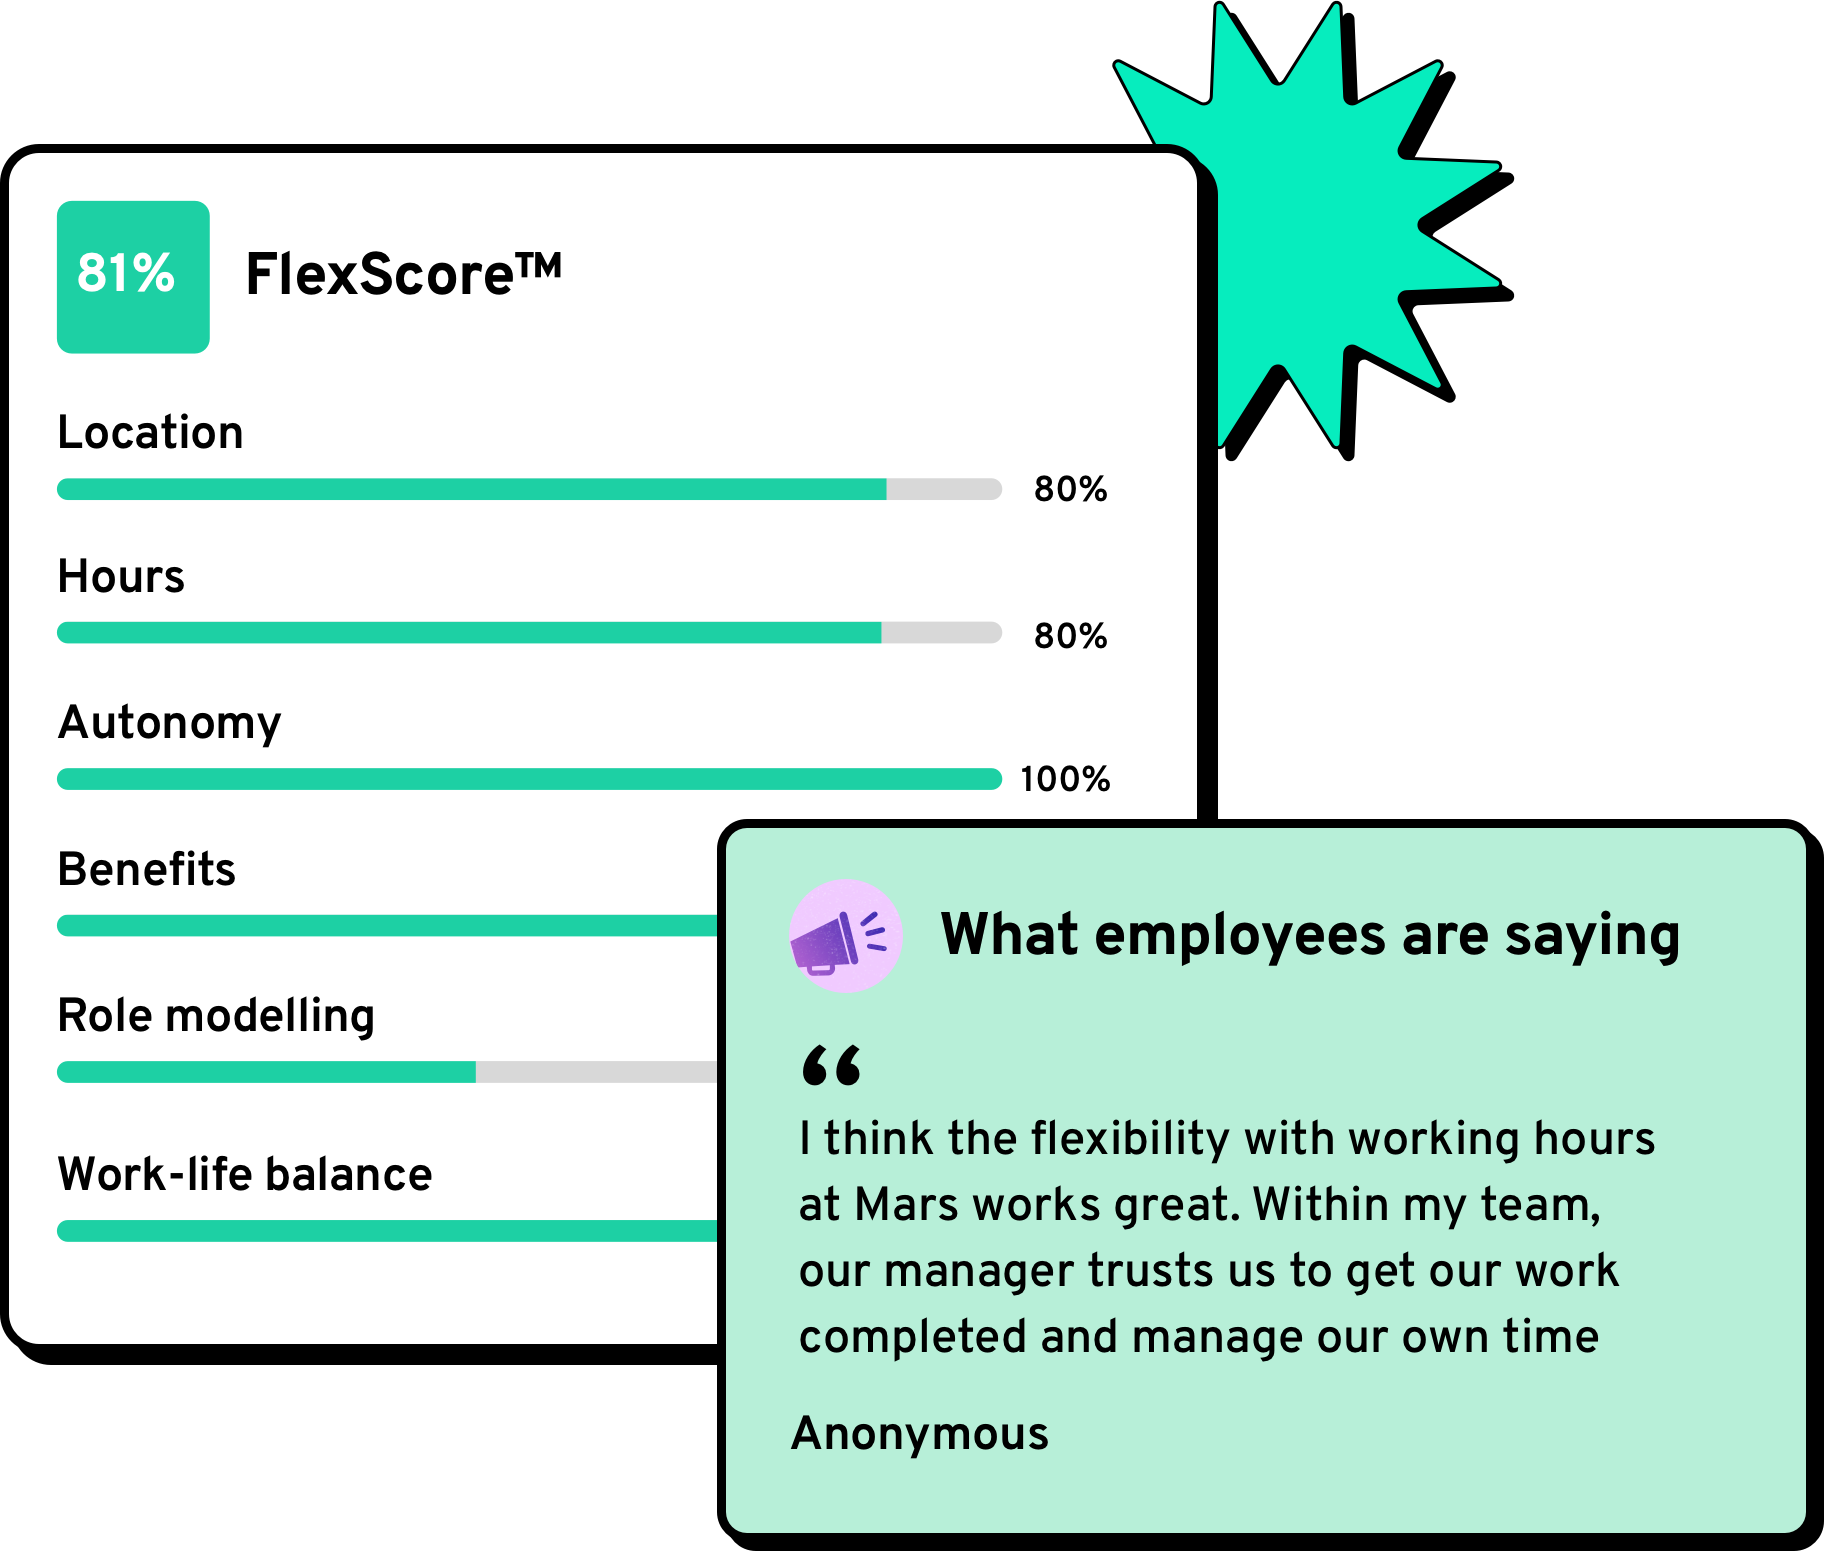 What employees are saying